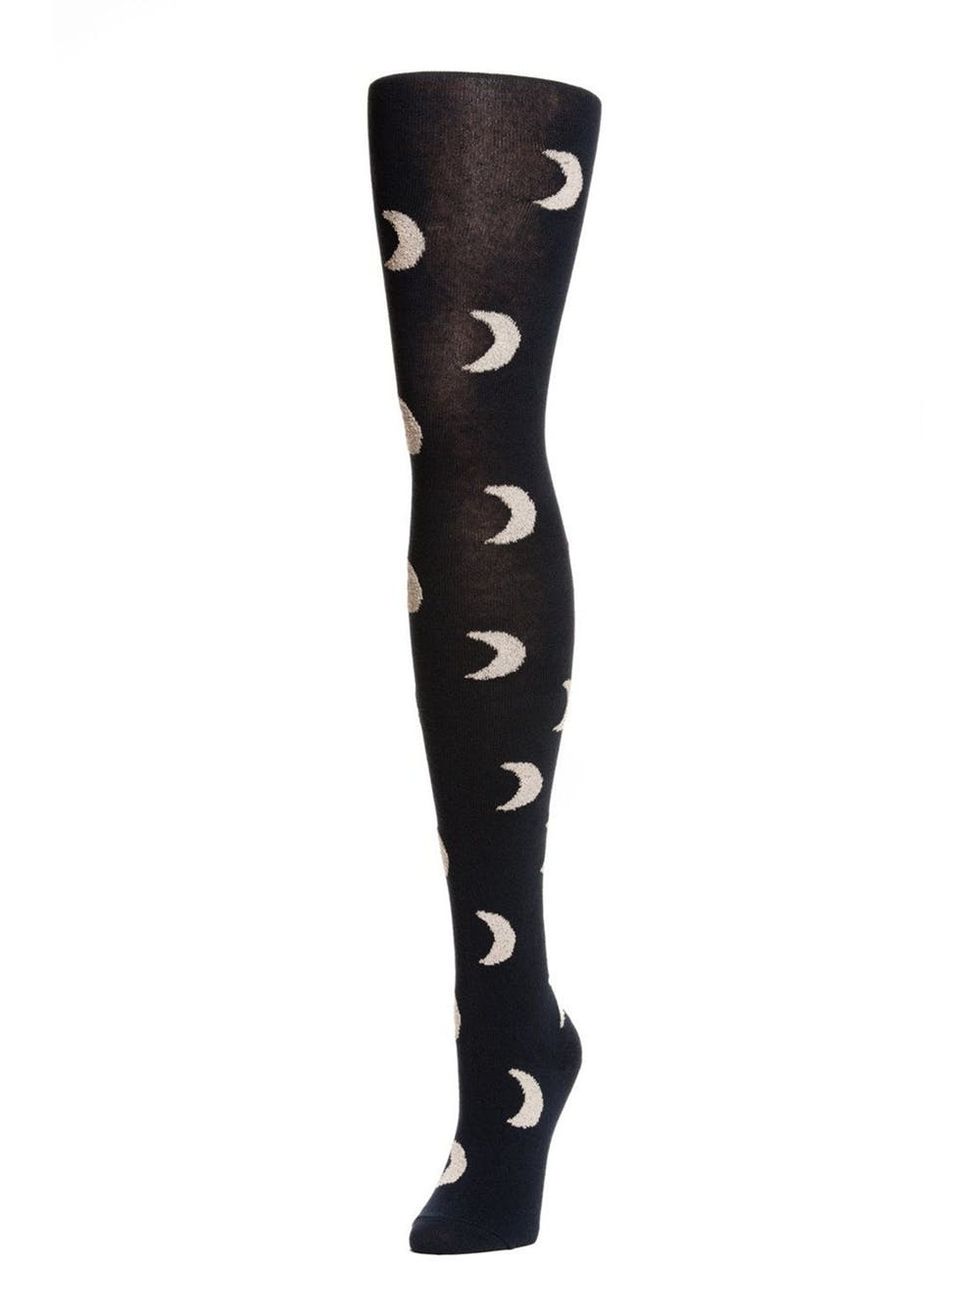 12 Bold Tights That Make a Statement This Fall